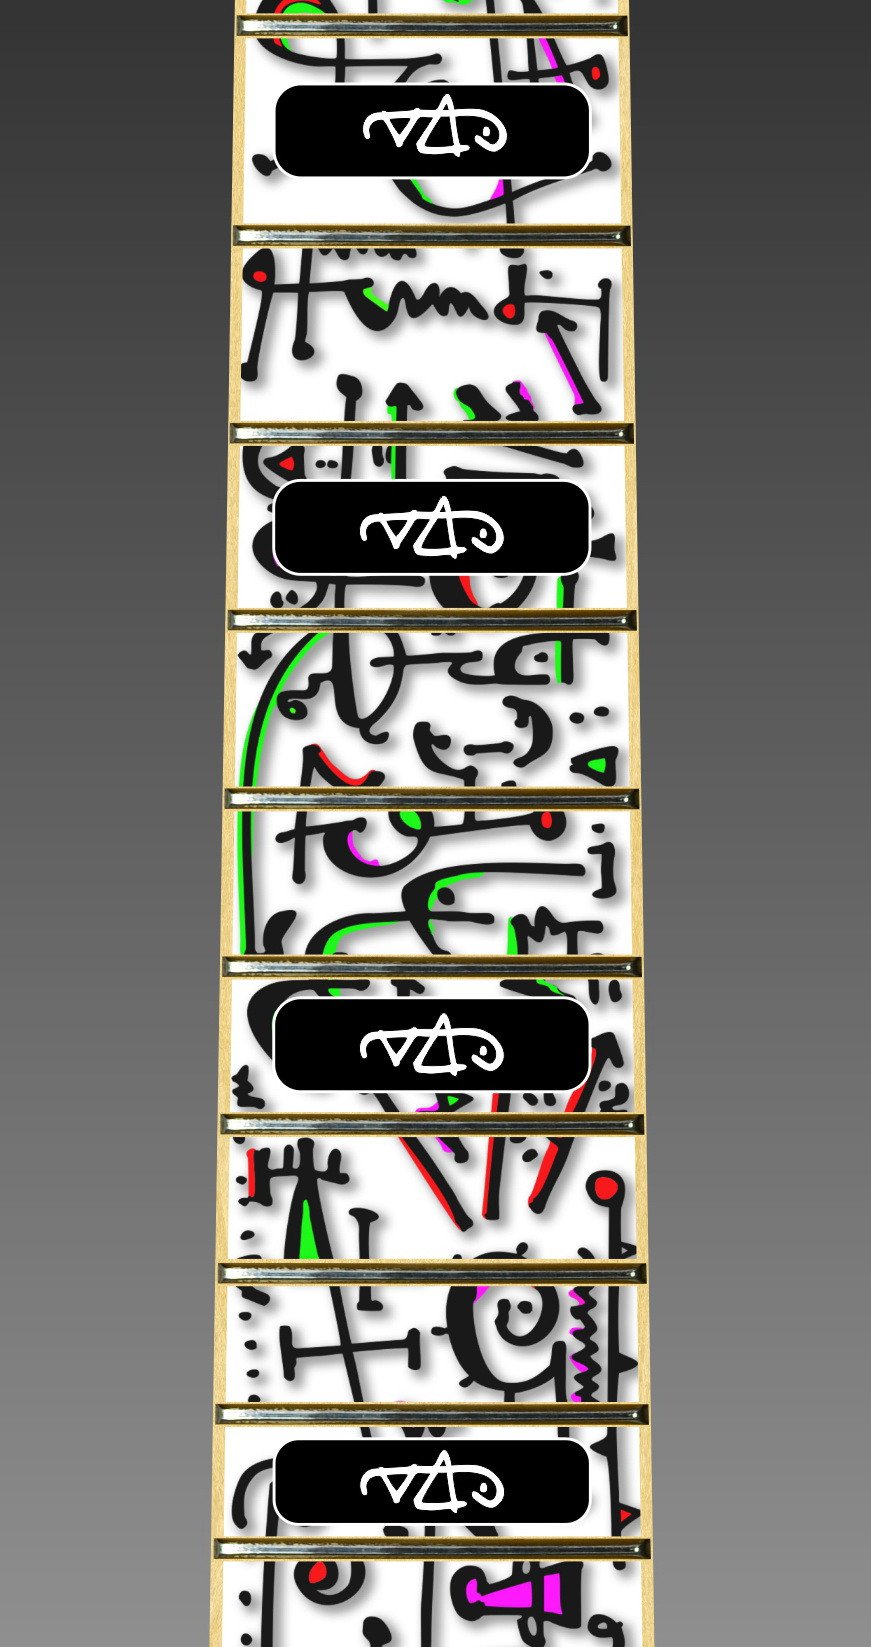 close up image of a guitar neck against a grey background. there is a fret protector on the guitar. it is white with pink/red, green, and black symbols all over it. some of the frets have a black rectangle with a white steve vai logo on it. The steve vai logo makes the word "vai" with an upside down triangle, a right side up one, and a line going across the triangles with a curl at the end next to the triangle that is upright. 